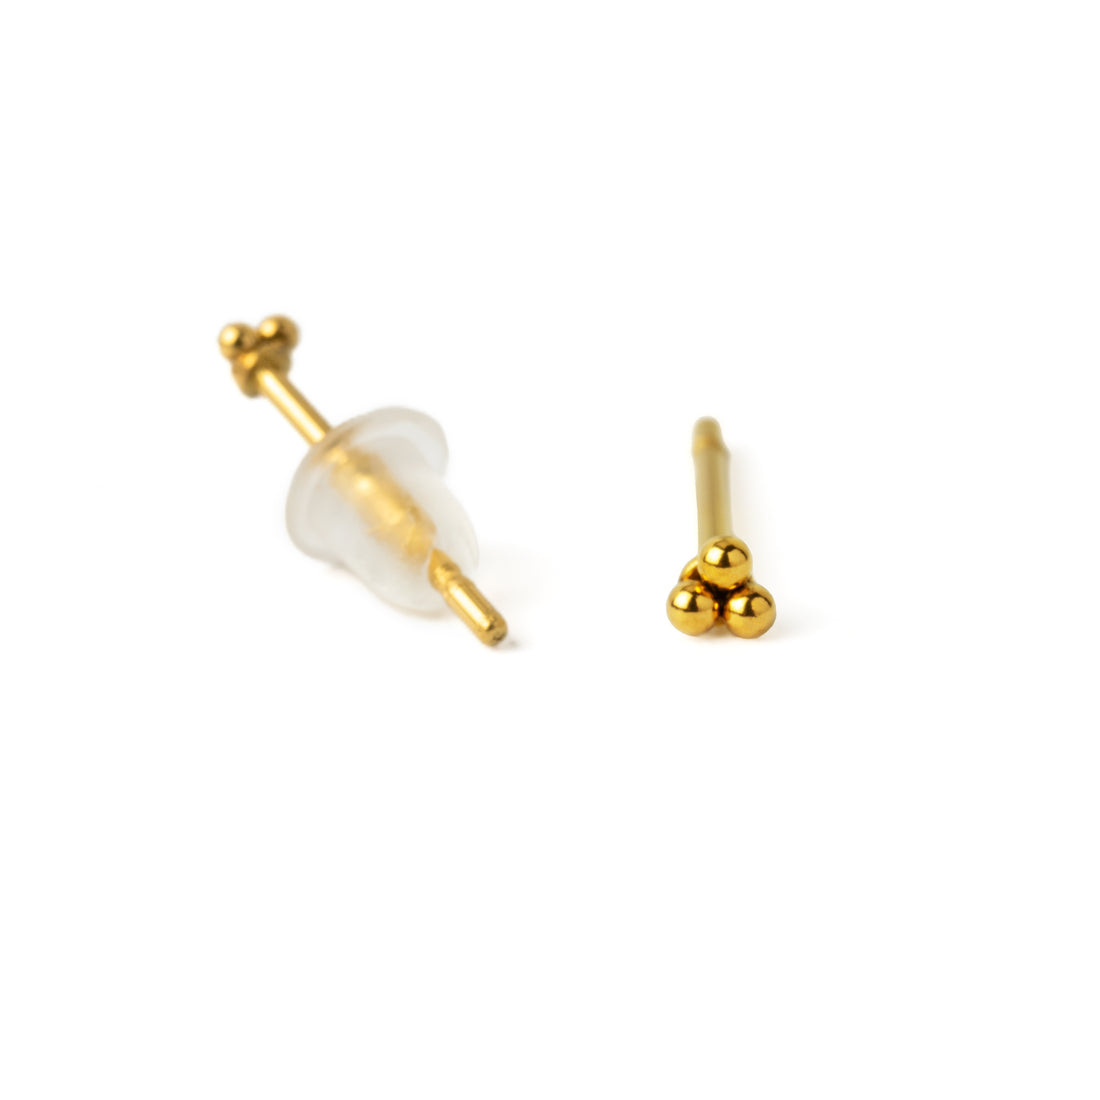 Trinity Golden Ear Studs front and back view